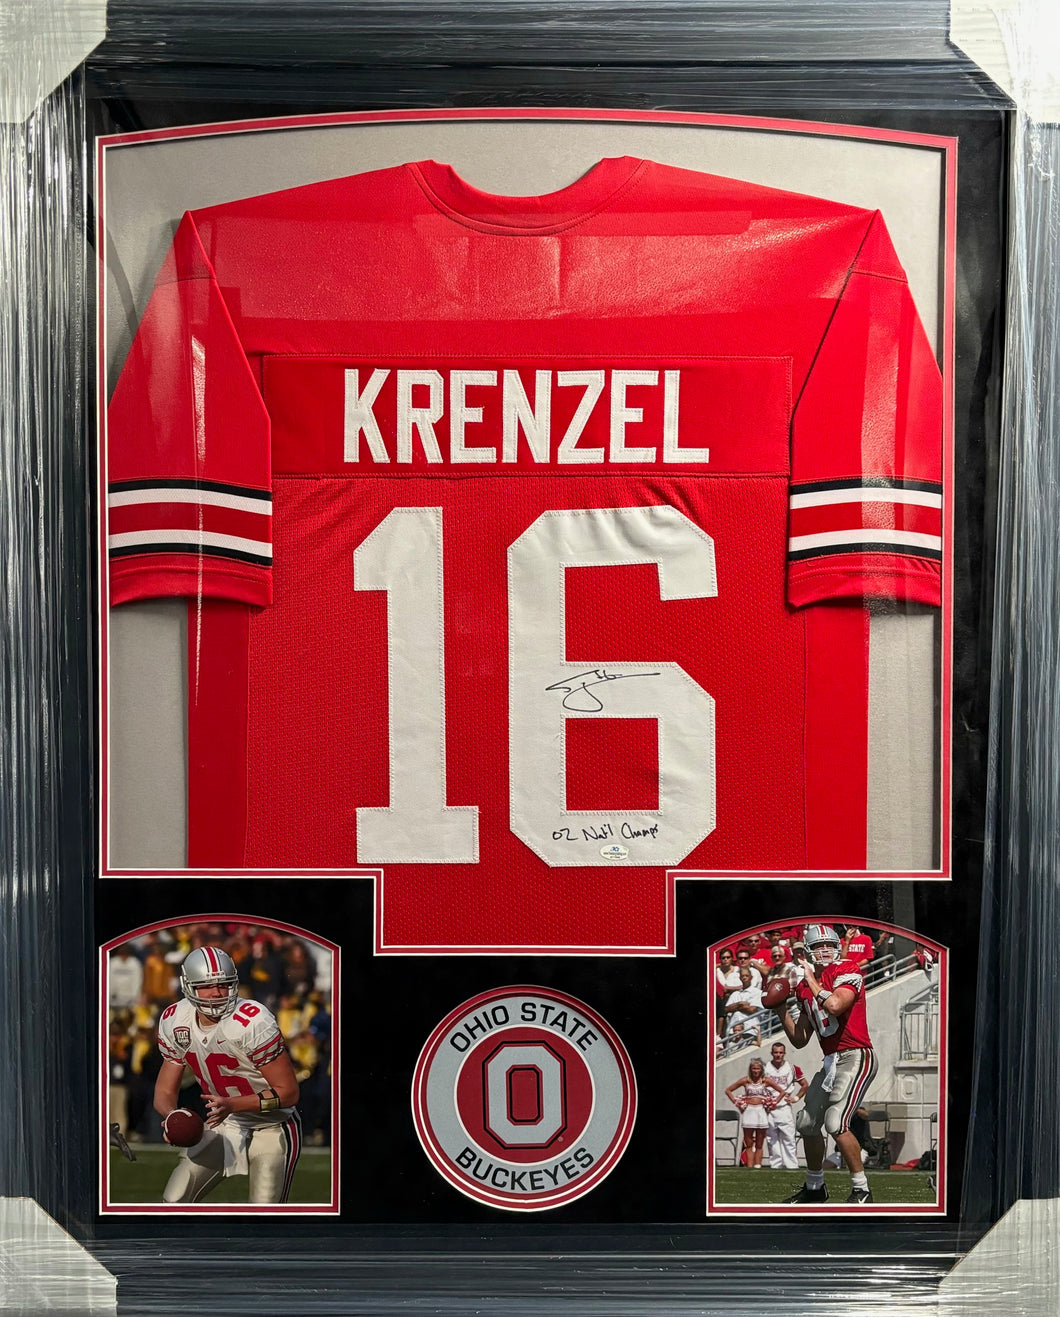 The Ohio State University Buckeyes Craig Krenzel Signed Red Jersey with 02 Nat'l Champs Inscription Framed & Suede Matted with COA